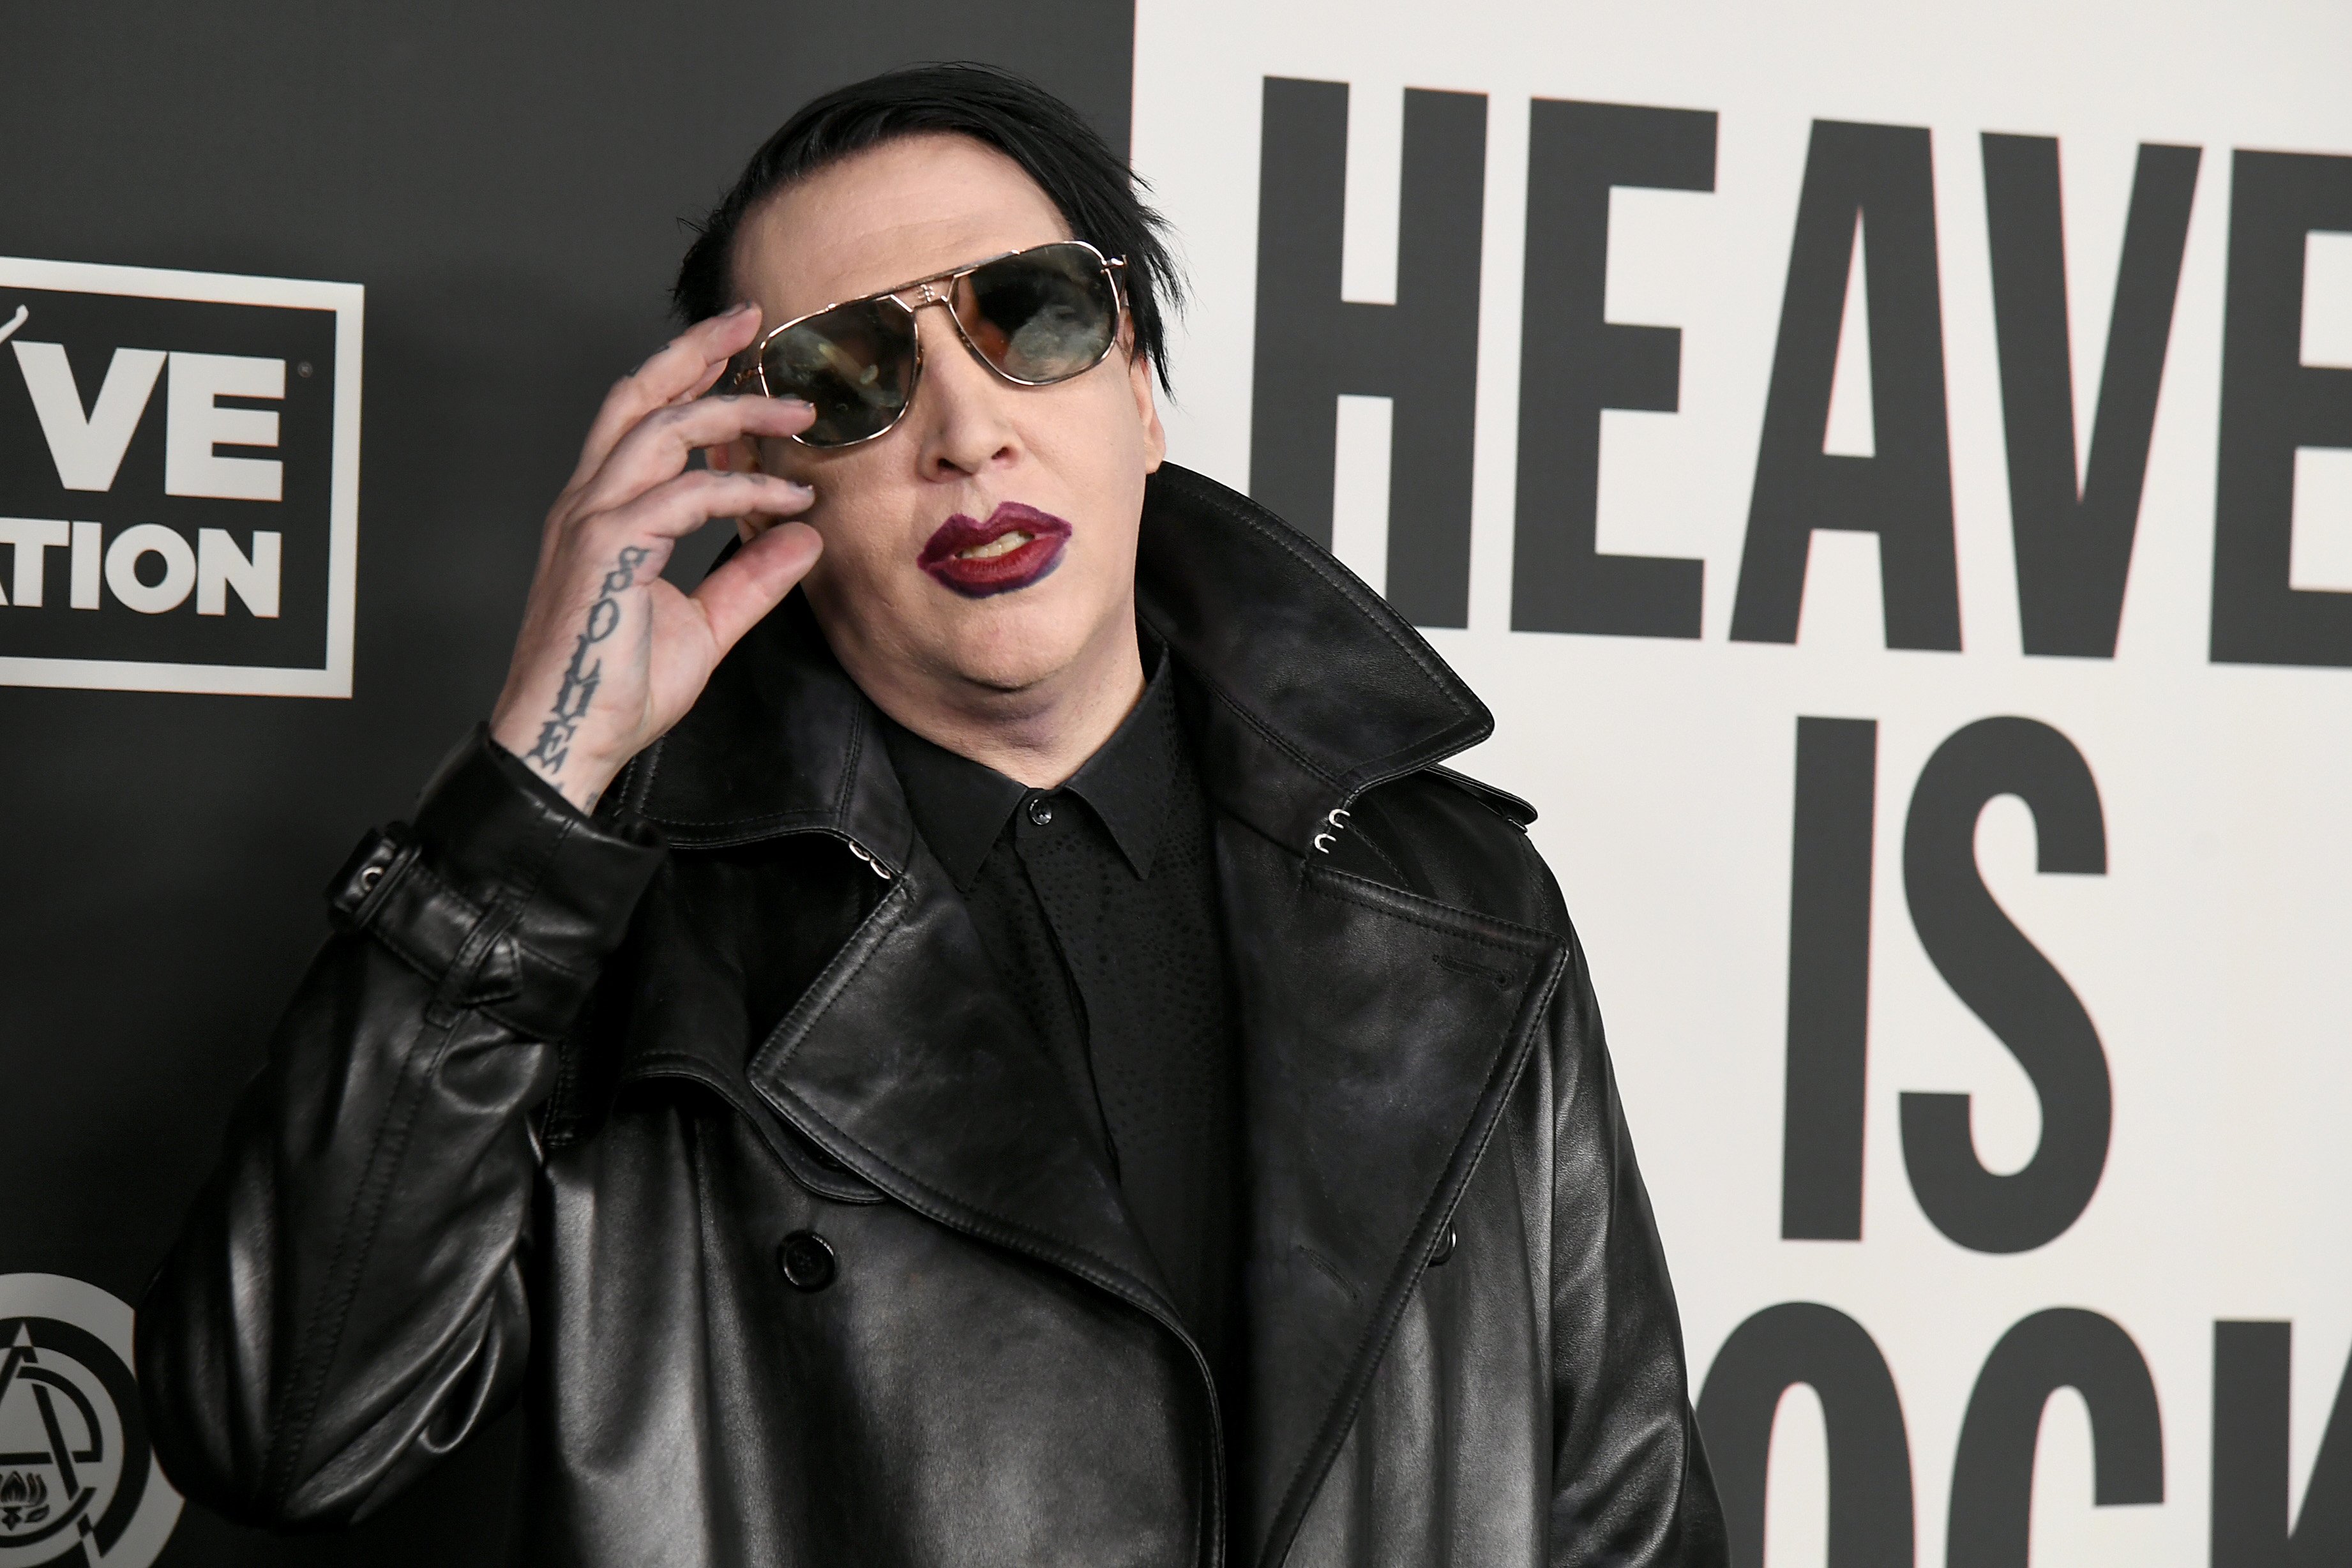 Marilyn Manson attends The Art Of Elysium's 13th Annual Celebration, 2020, Los Angeles, California. | Photo: Getty Images